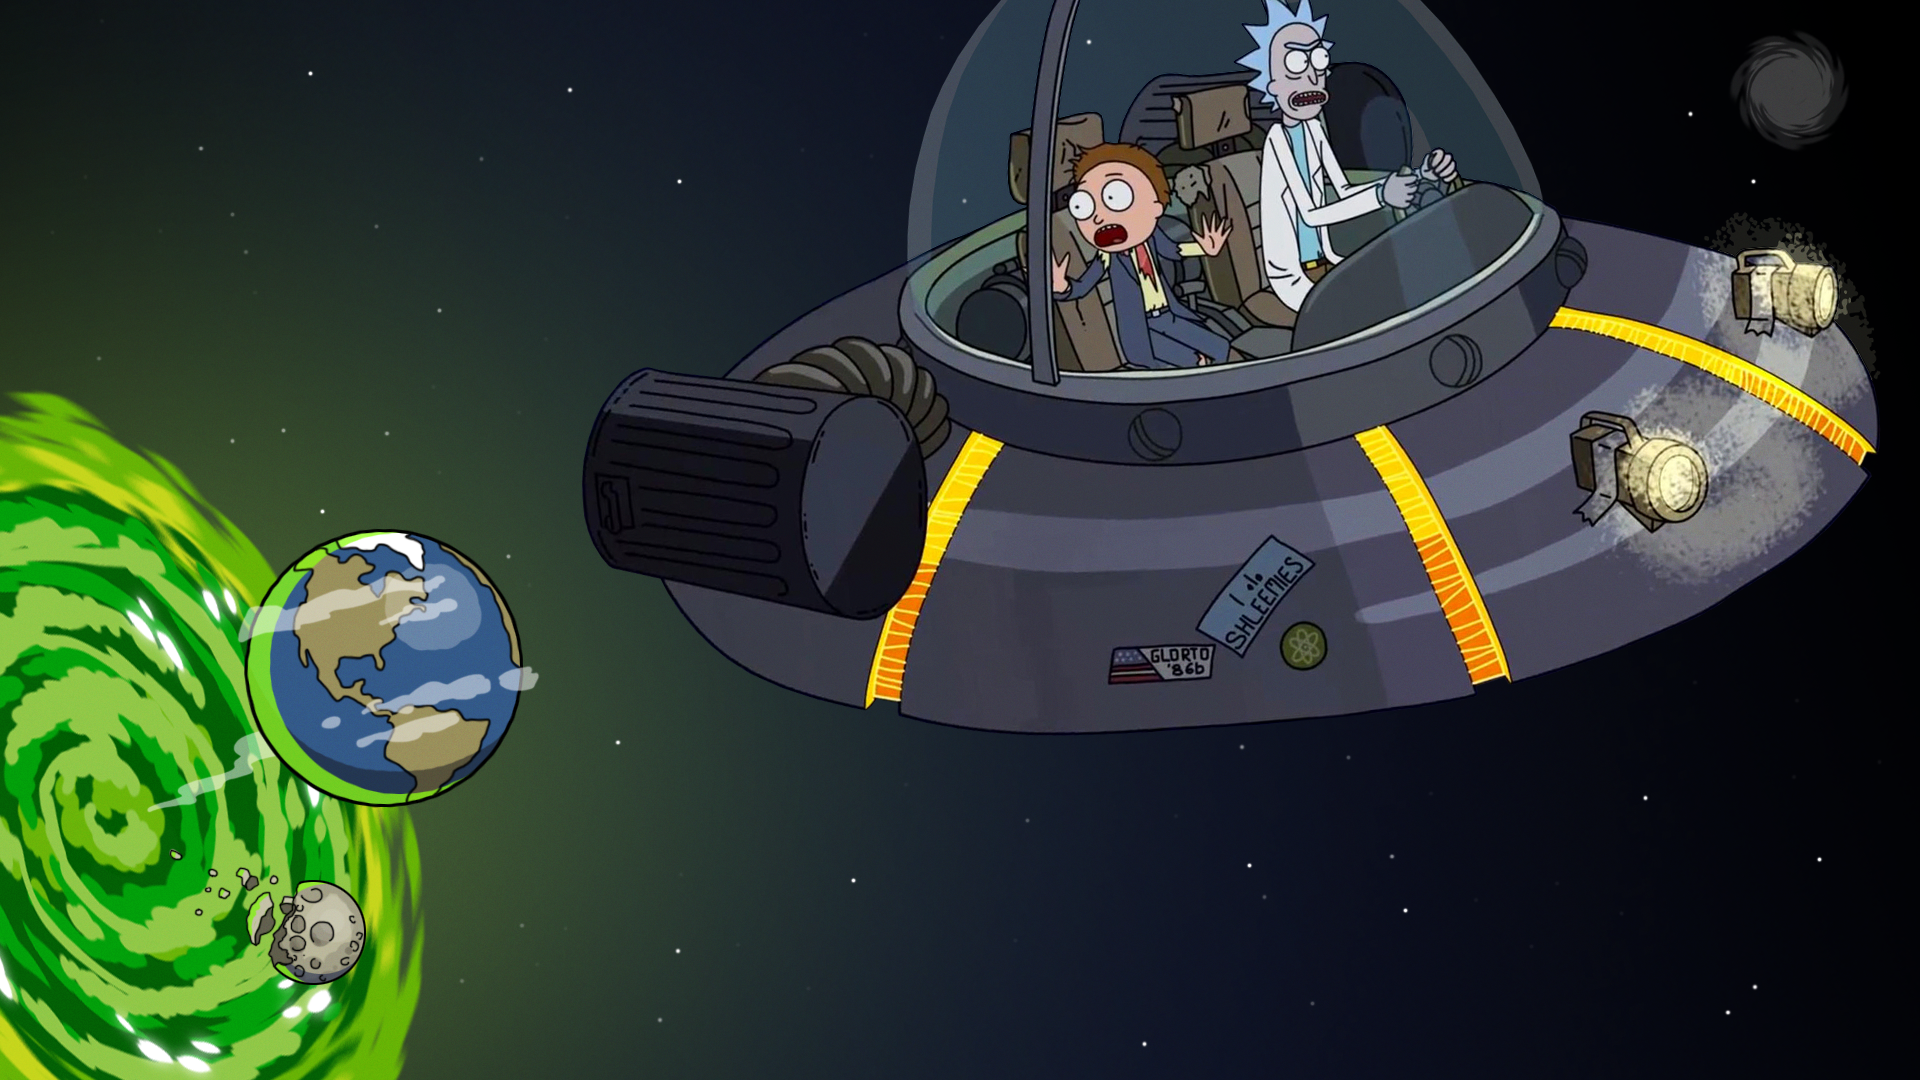 Rick And Morty Spacecraft - HD Wallpaper 